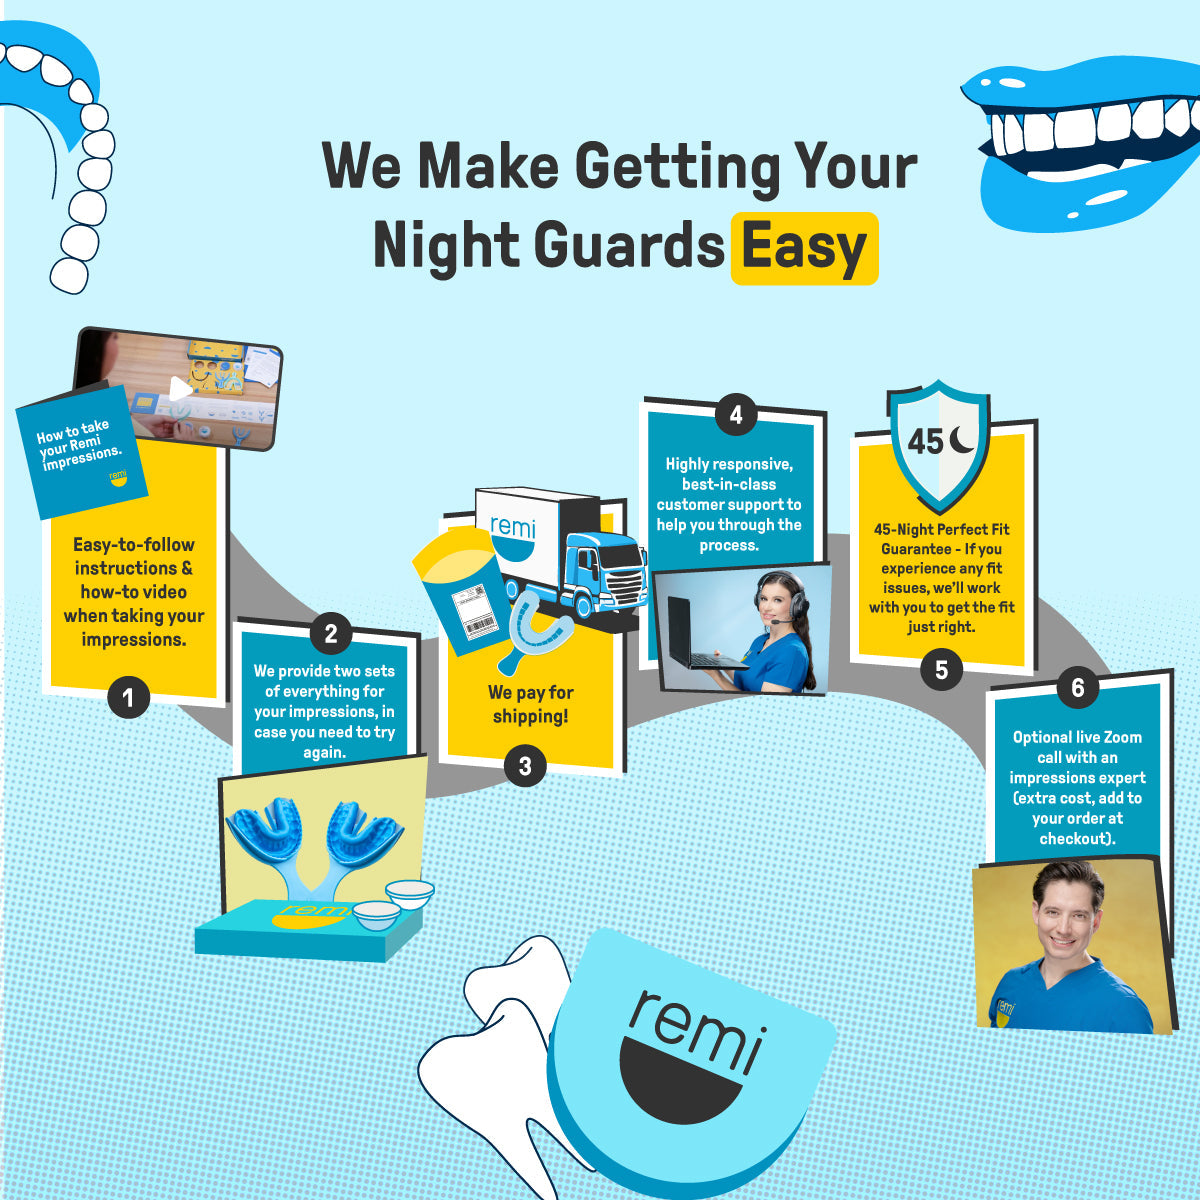 Infographic explaining the process of ordering dental-grade quality Custom Night Guards from remi, featuring step-by-step icons, images, and customer support options.